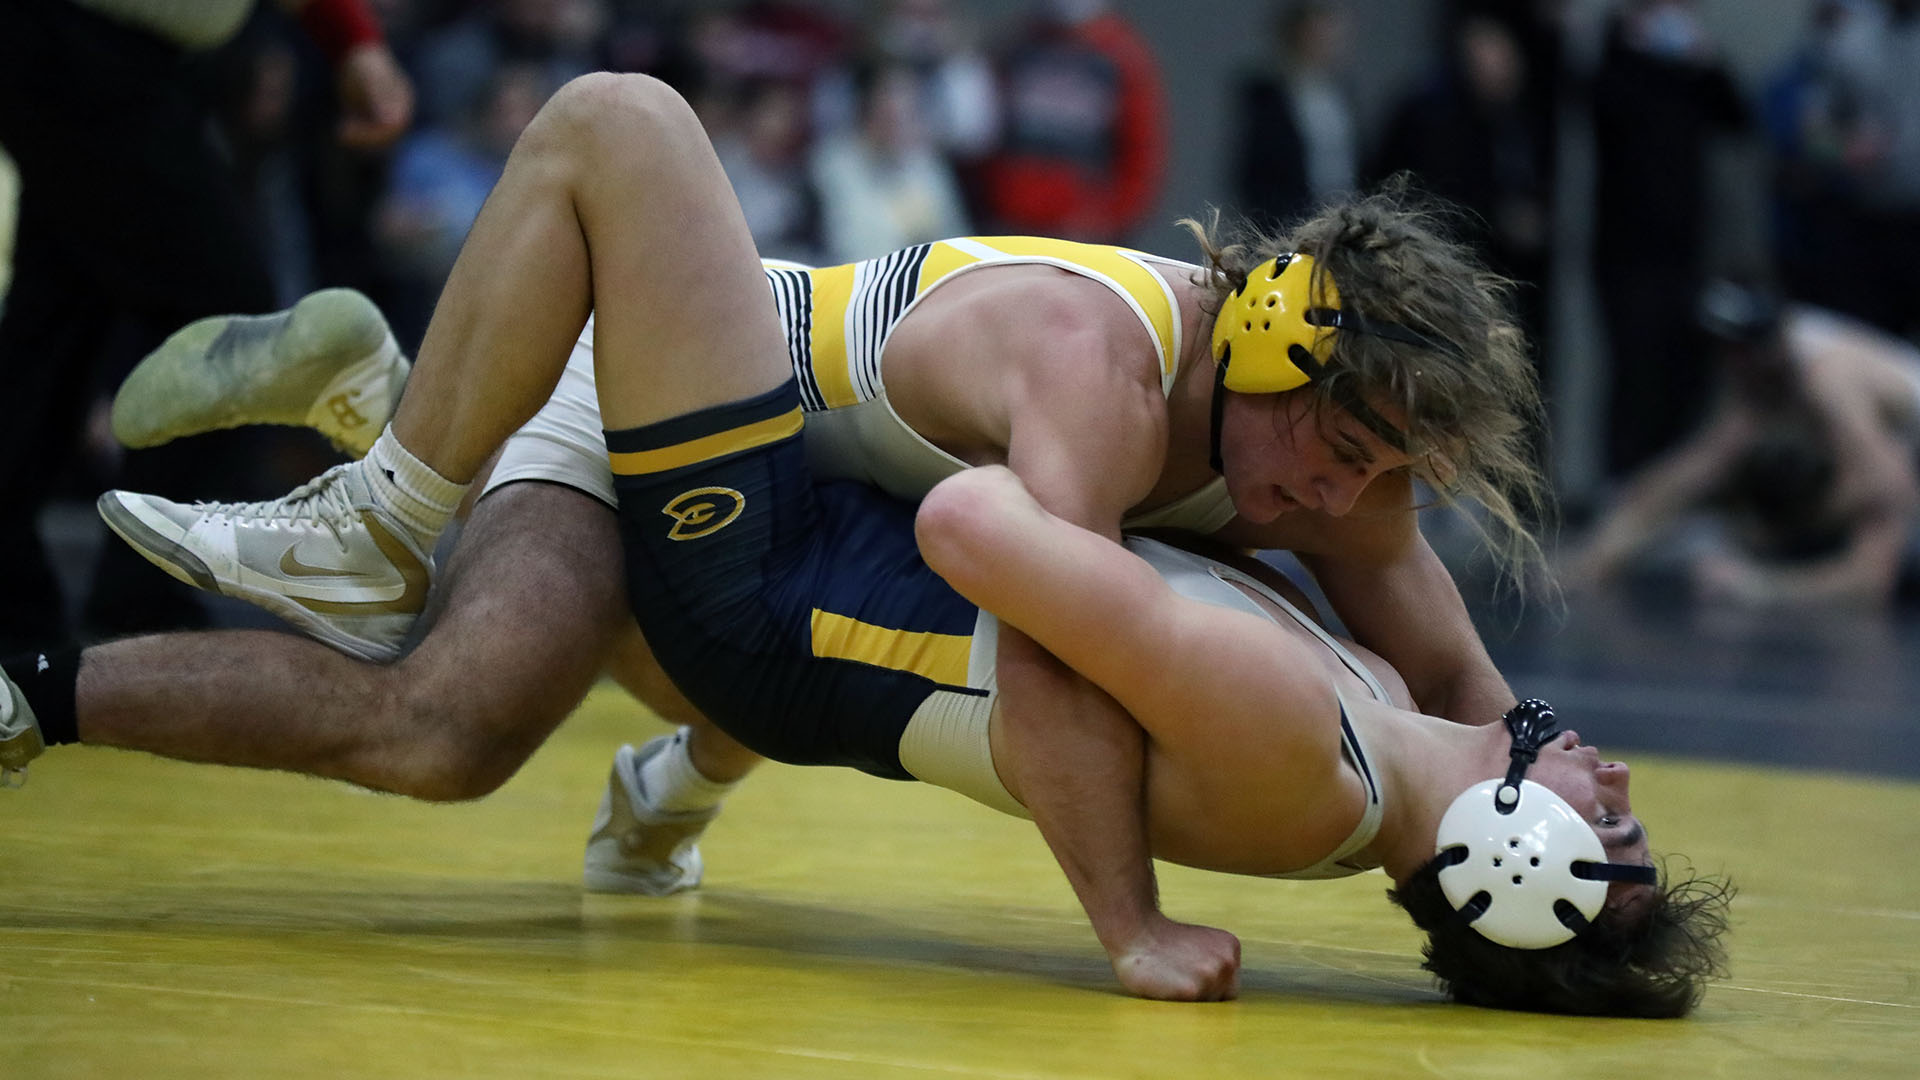 Preston Morgan's pin at 174 pounds gave UW-Oshkosh the lead over UW-Eau Claire for good.